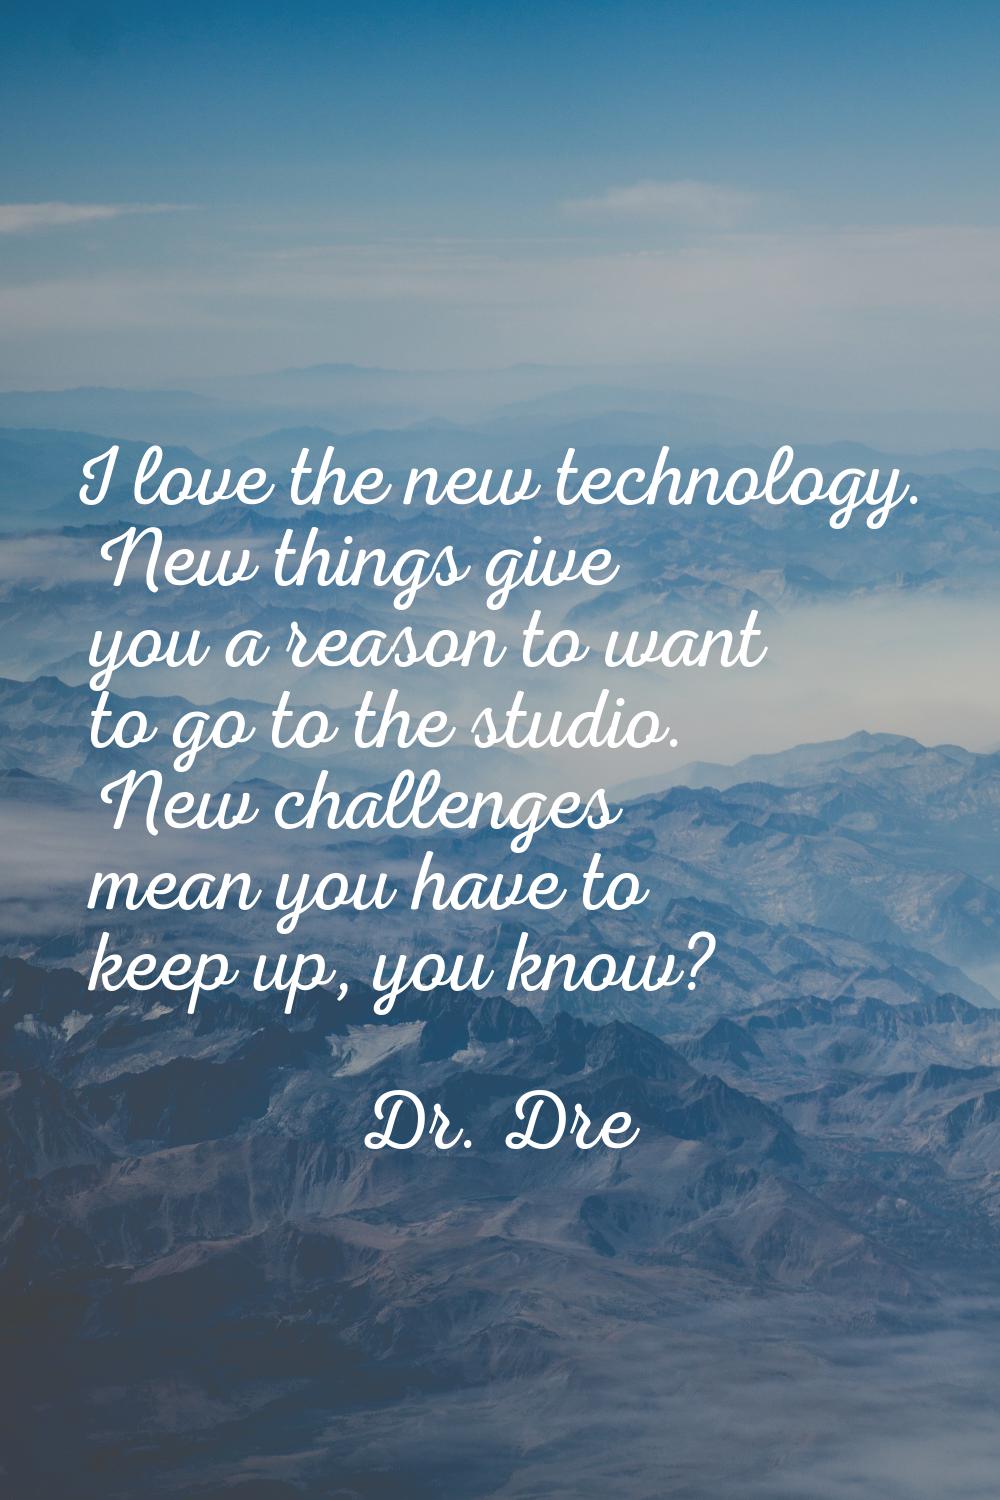 I love the new technology. New things give you a reason to want to go to the studio. New challenges